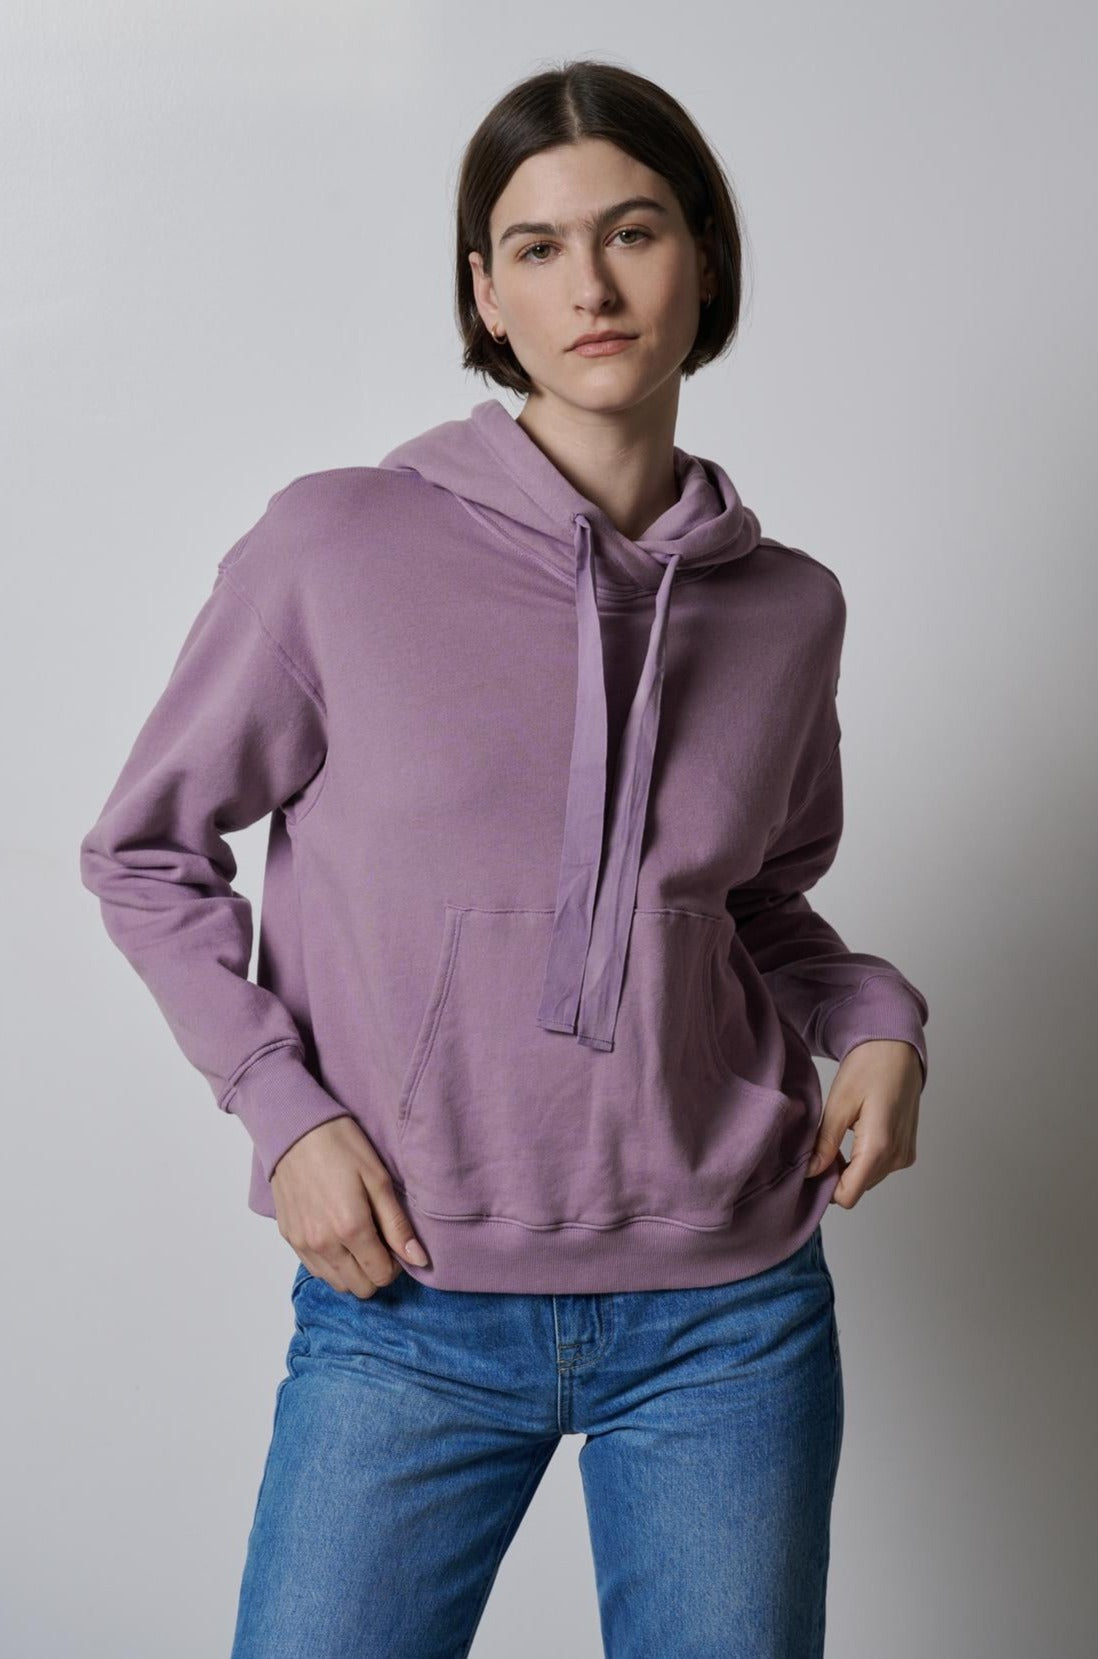   A model wearing a OJAI HOODIE by Velvet by Jenny Graham and jeans. 